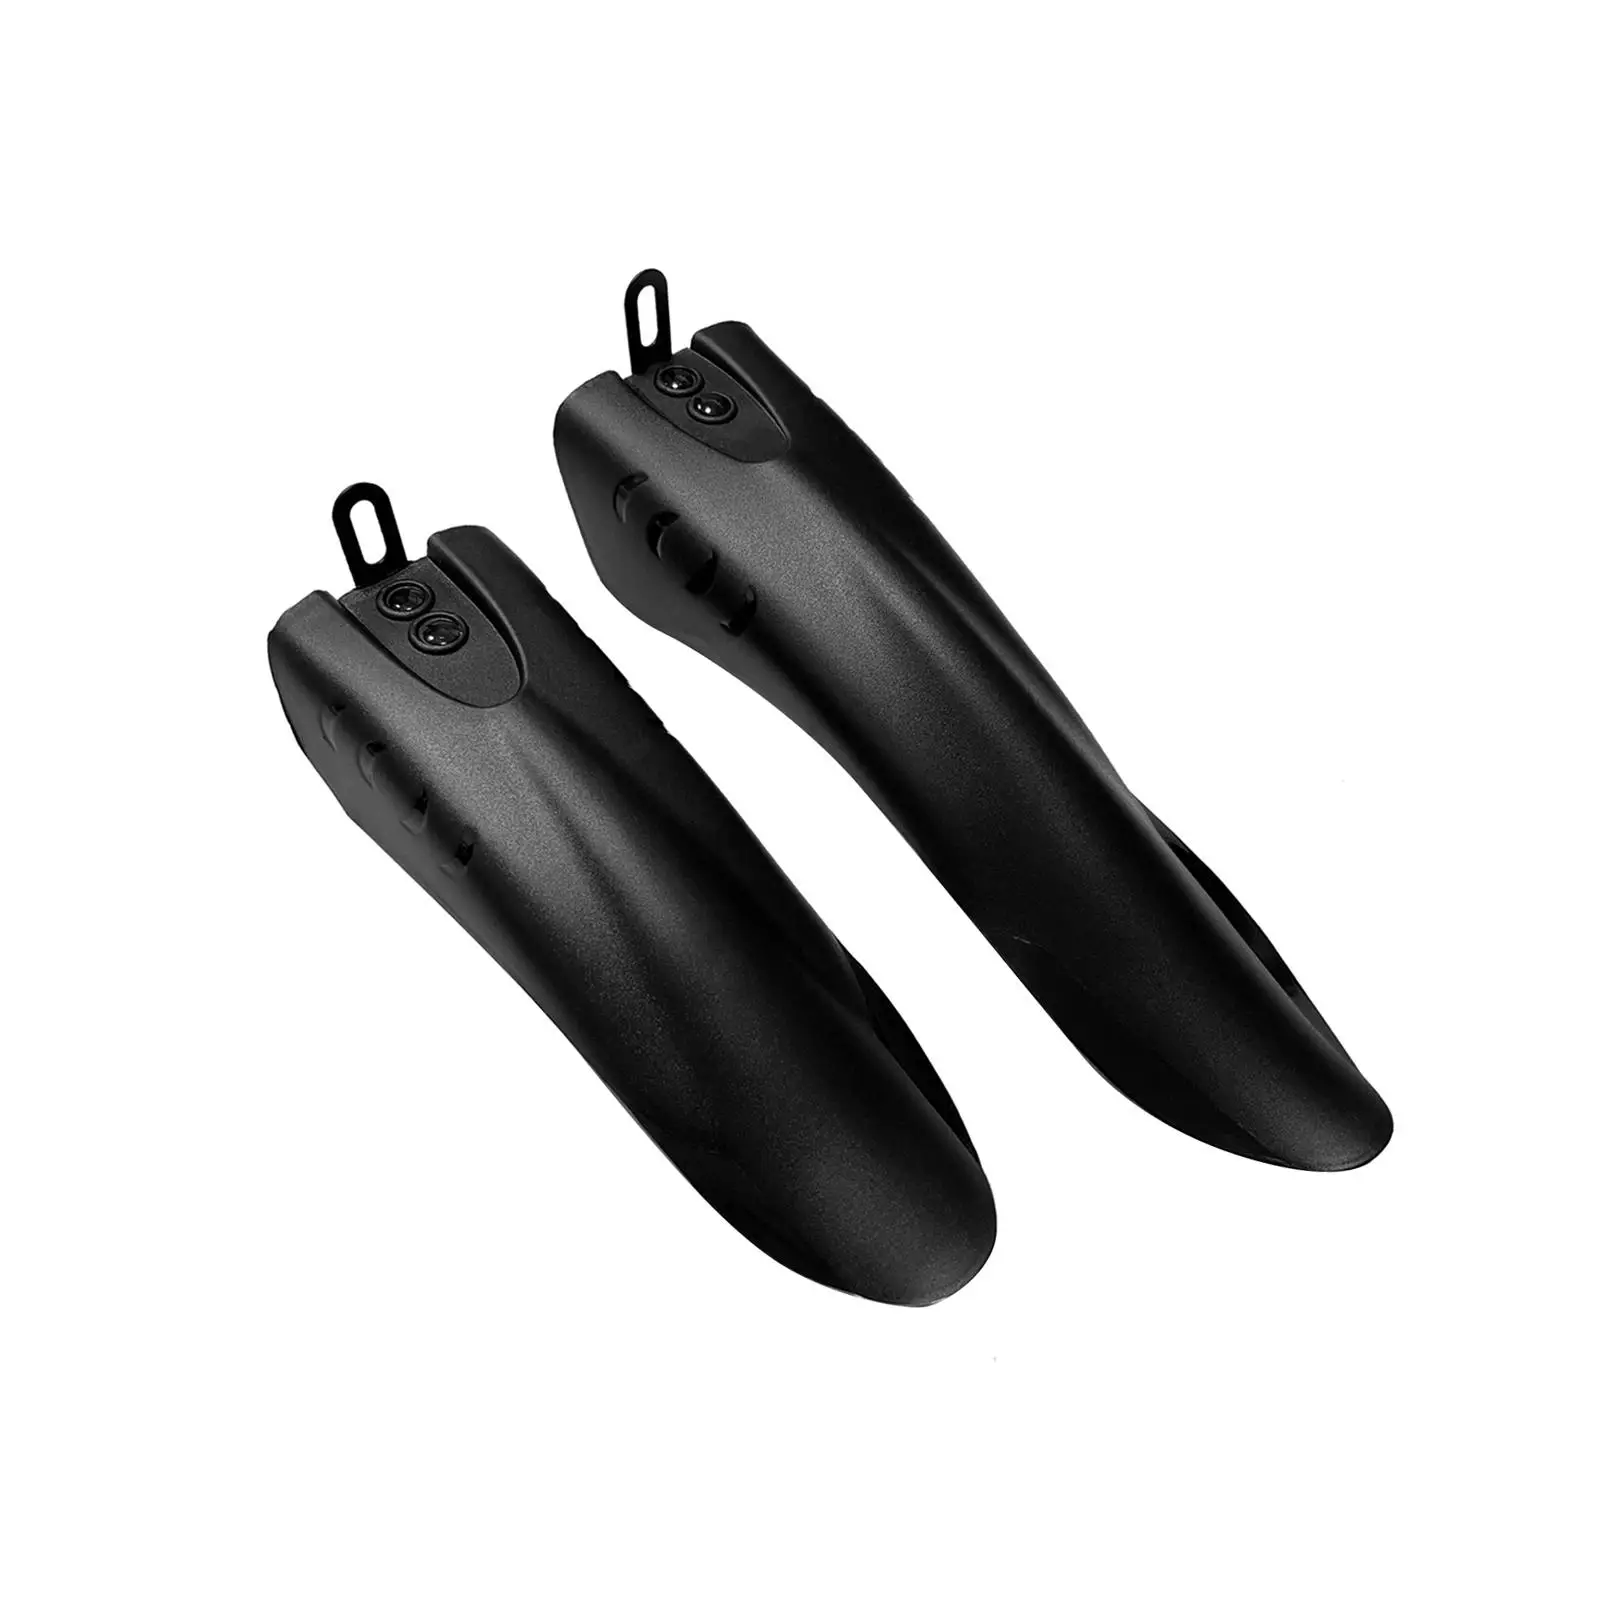 Bike Mudguard Front Rear Set Mud Guard Accs Wheel Protection Durable Fenders Mudflap for Riding Outdoor